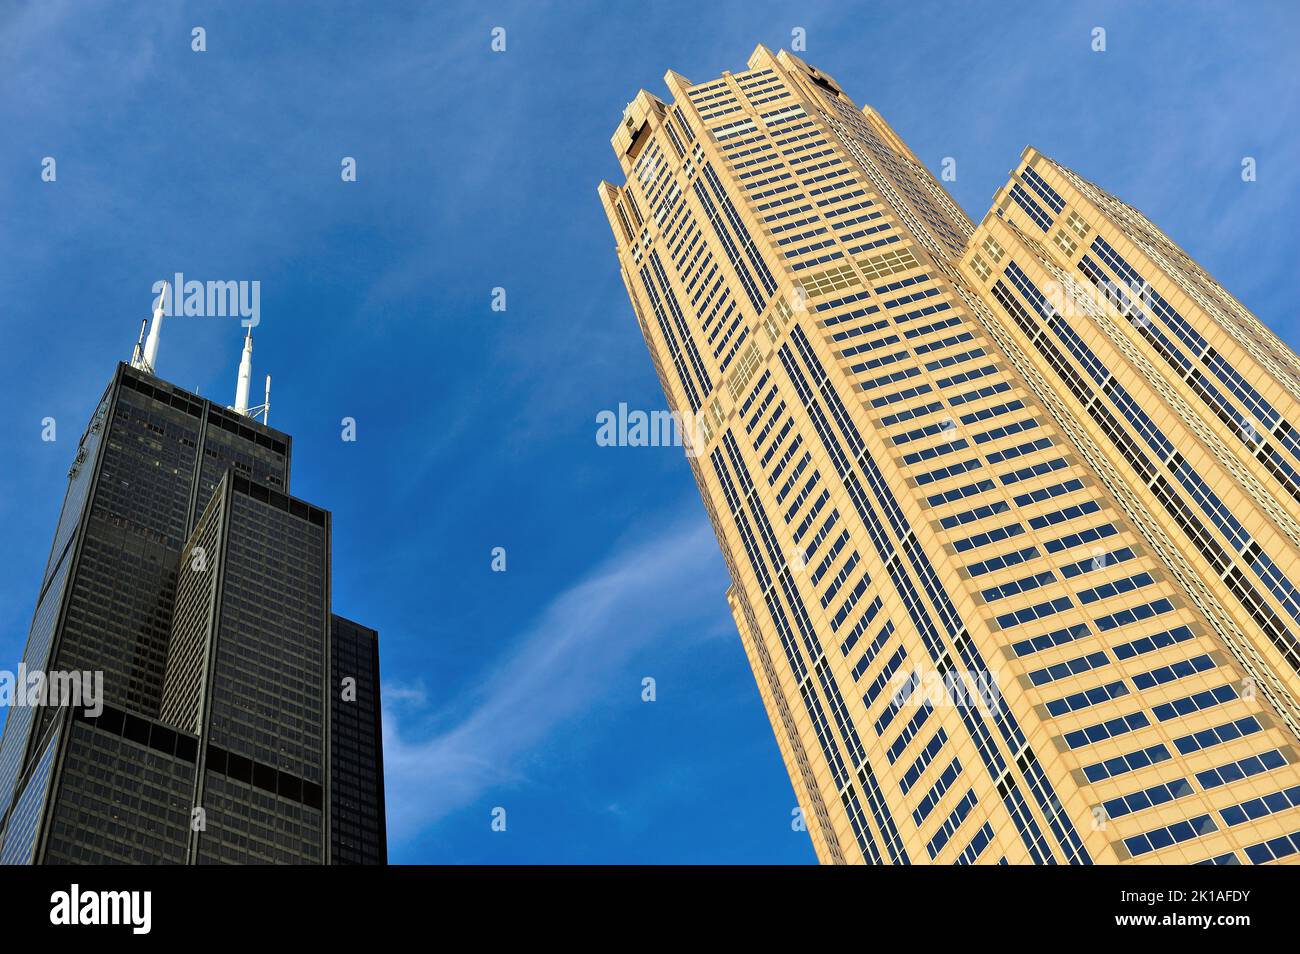 Chicago, Illinois, USA. Tall neighbors, the Willis Tower (formerly Sears Tower) the 311 S. Wacker Drive Building. Stock Photo